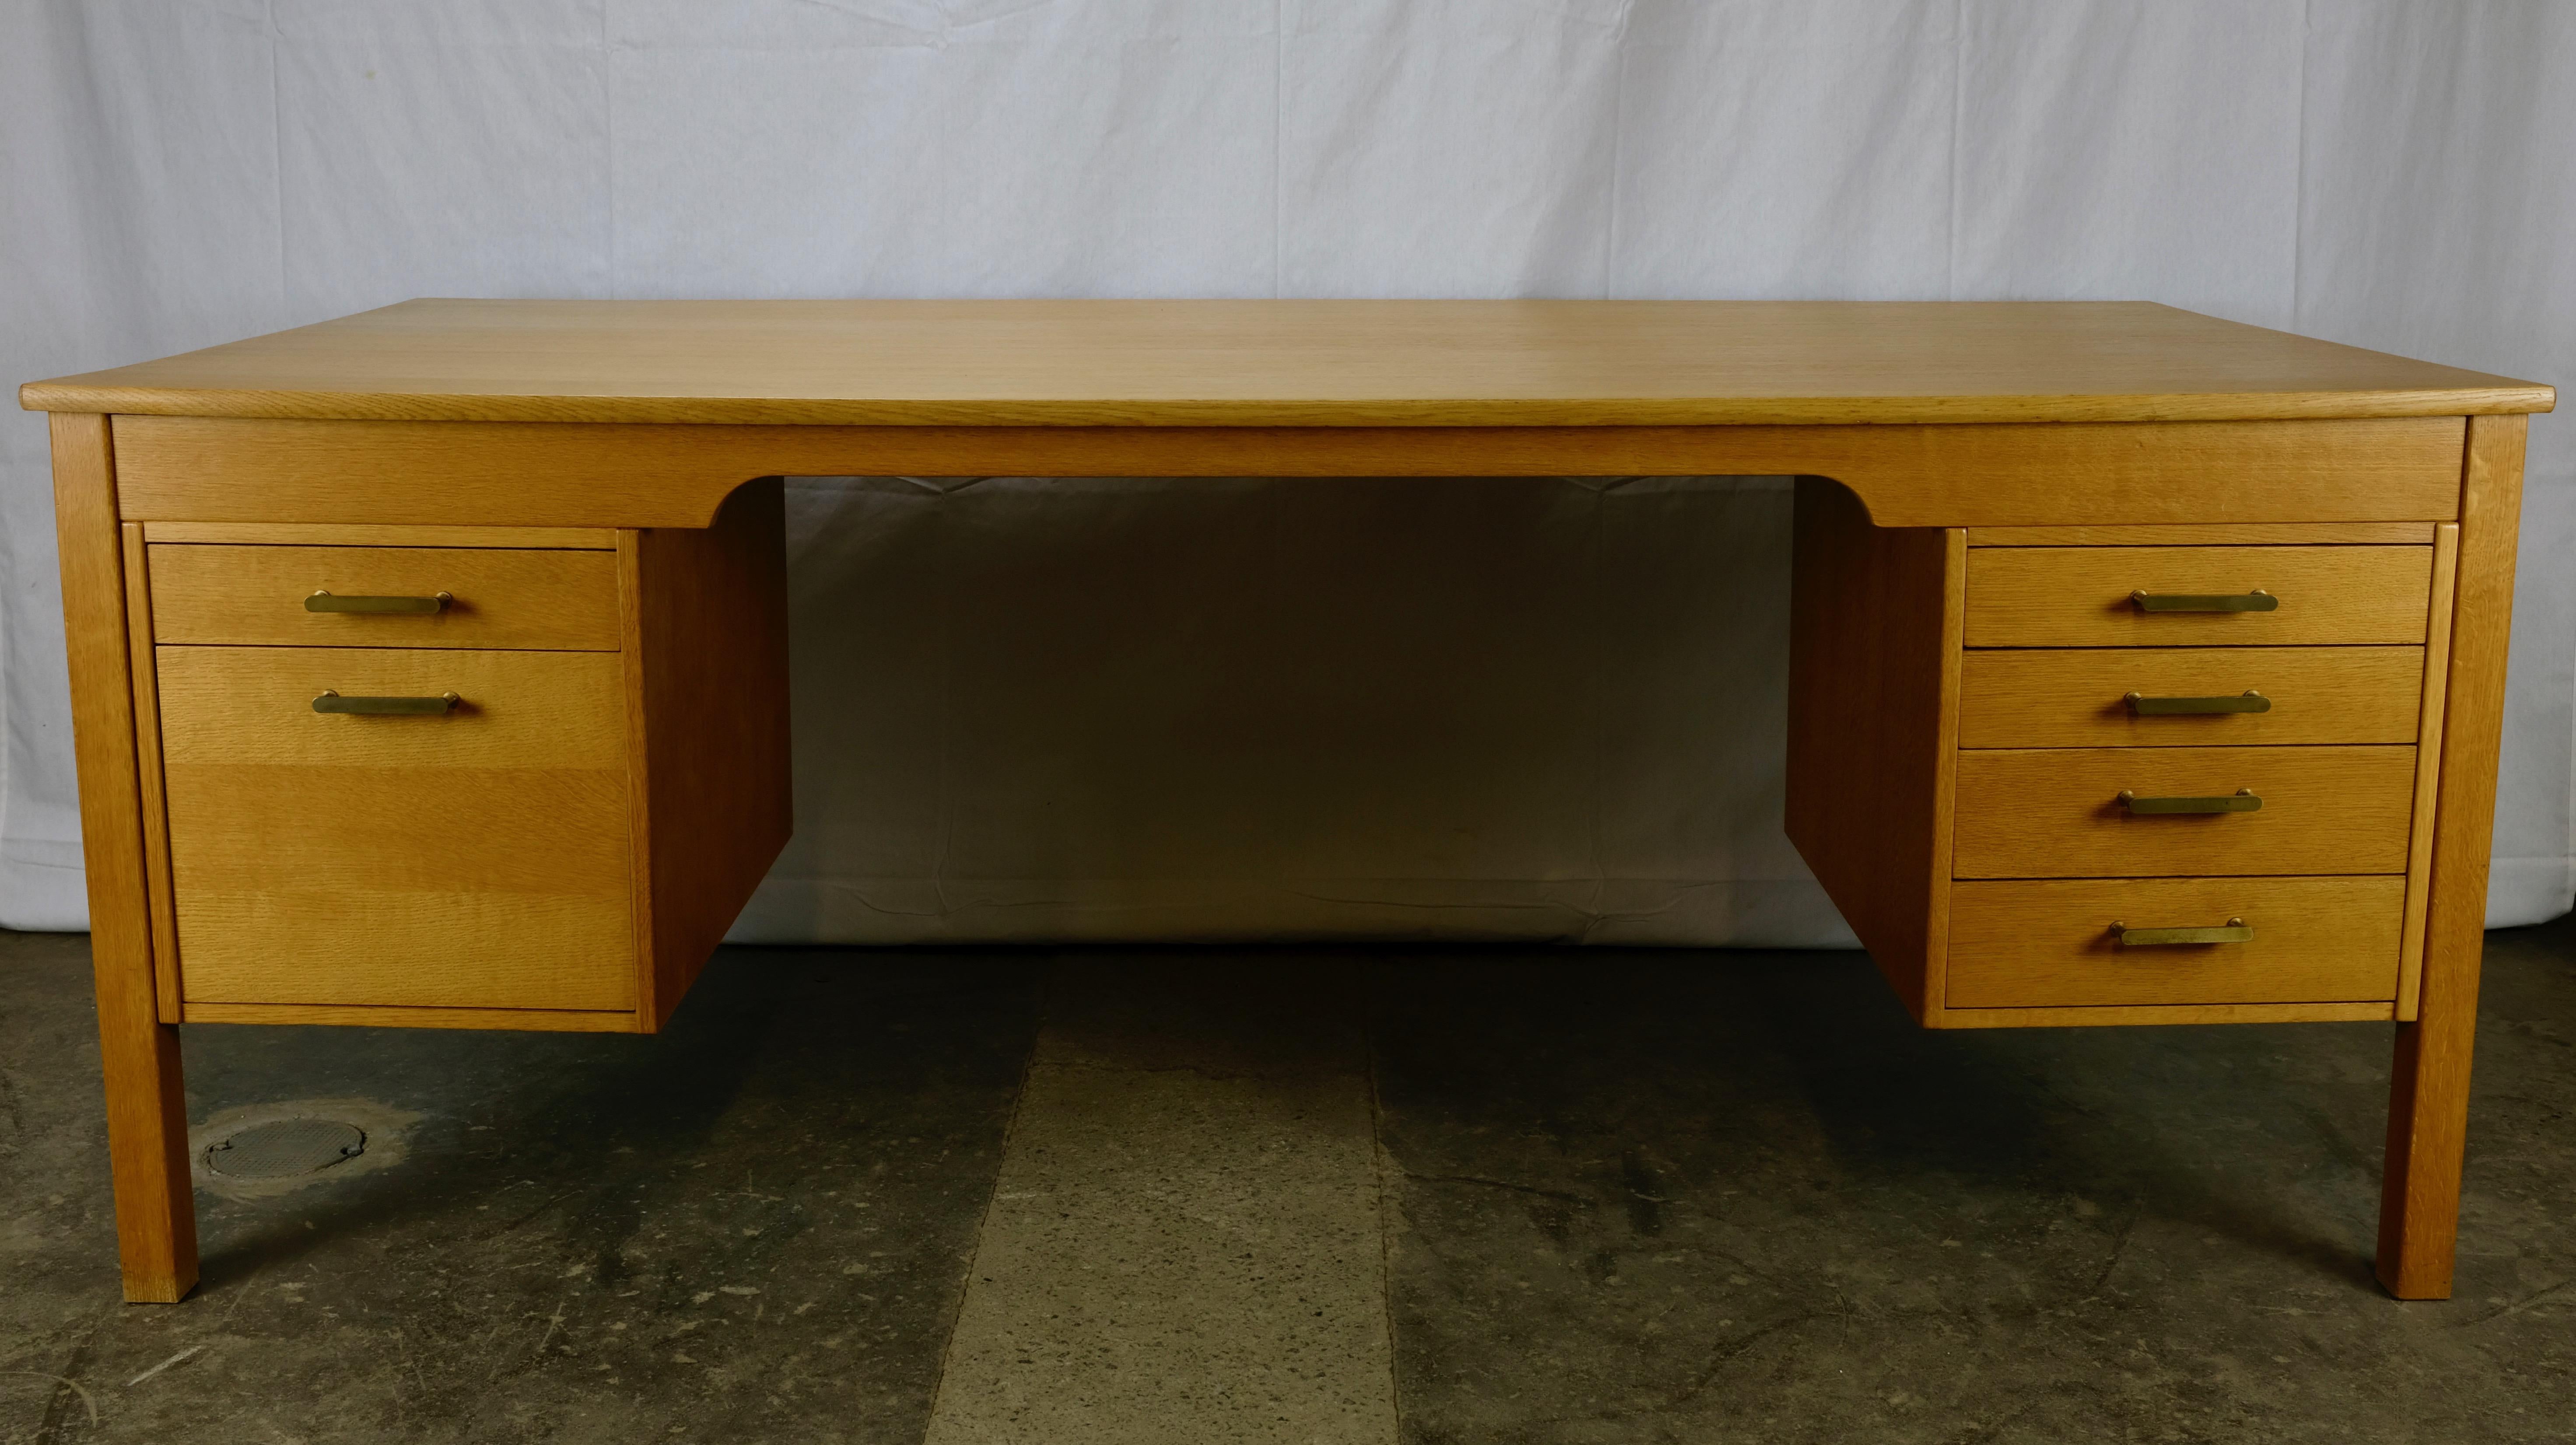 Large oak desk designed by Børge Mogensen and manufactured in Denmark by Søborg Møbelfabrik. Designed in 1970. 
The top is veneered in oak with solid oak edging while the legs, aprons and stretchers are all solid oak with several quartersawn